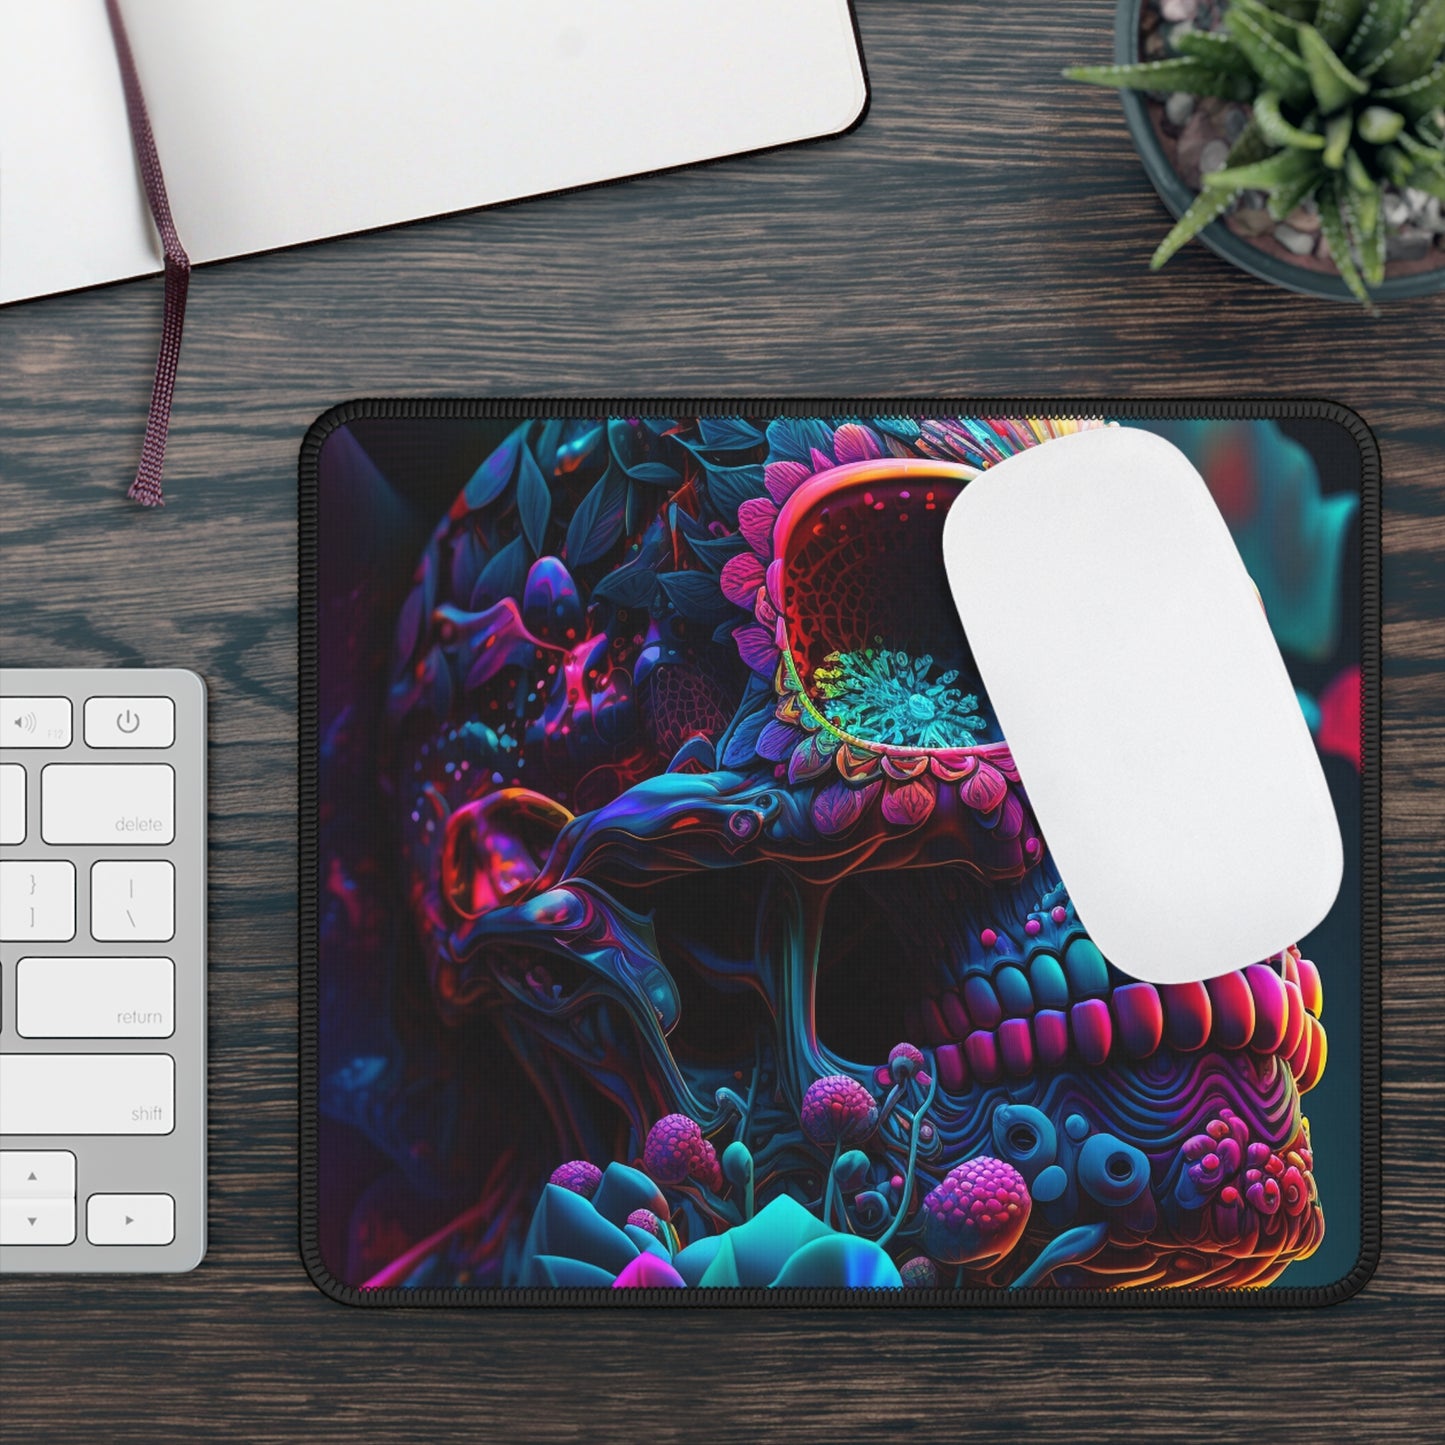 Gaming Mouse Pad  Florescent Skull Death 3